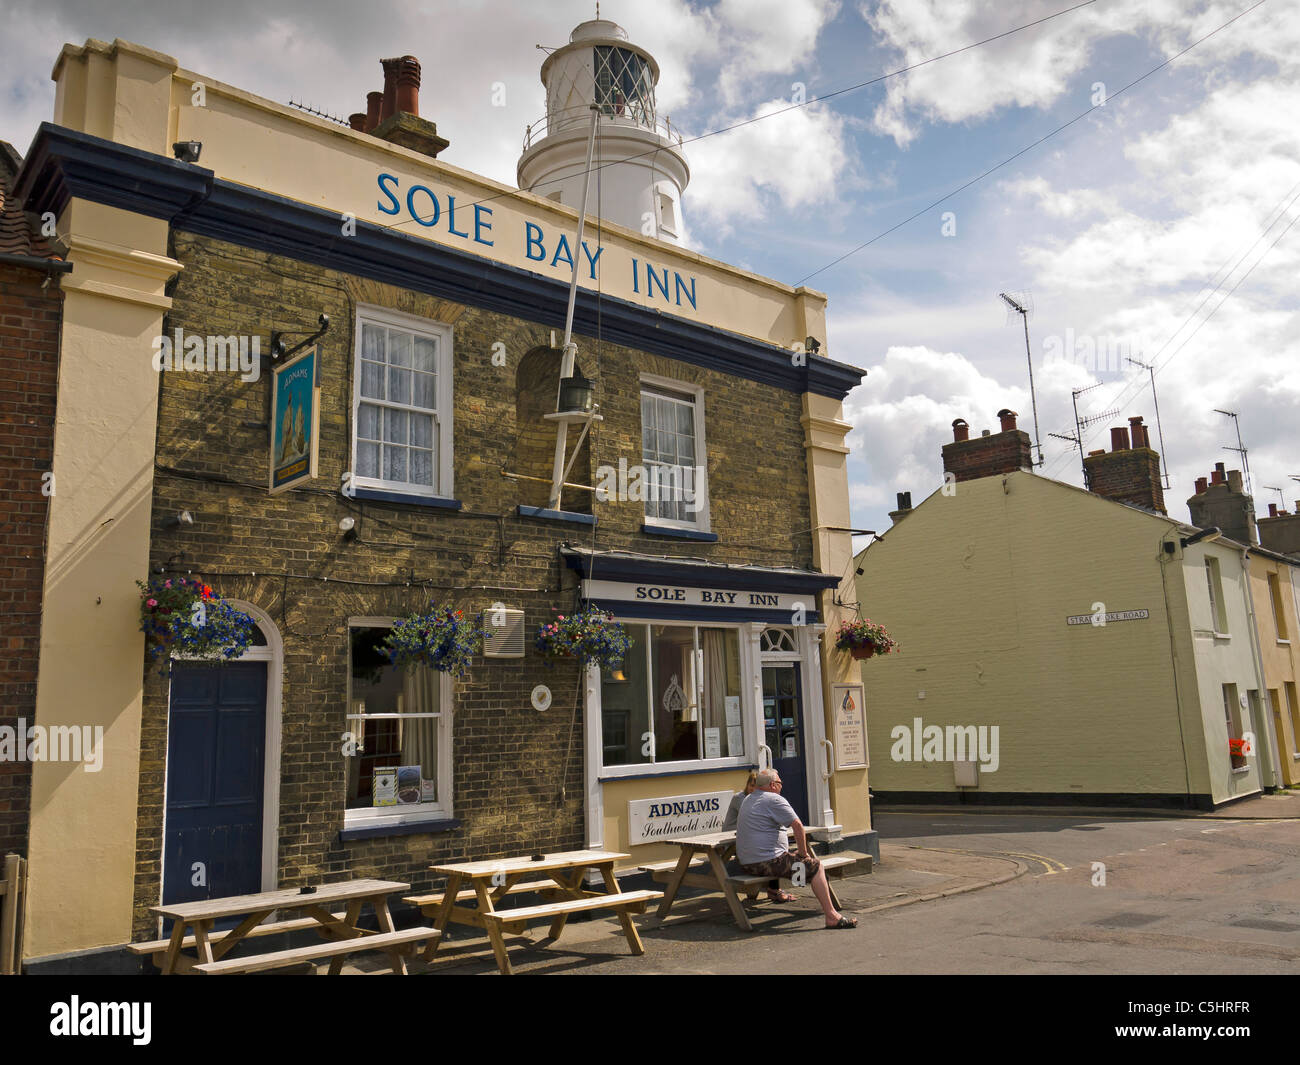 The Sole Bay Inn in Southwold named to commemorate the sea battle with the Dutch at nearby Sole Bay in 1672 Stock Photo